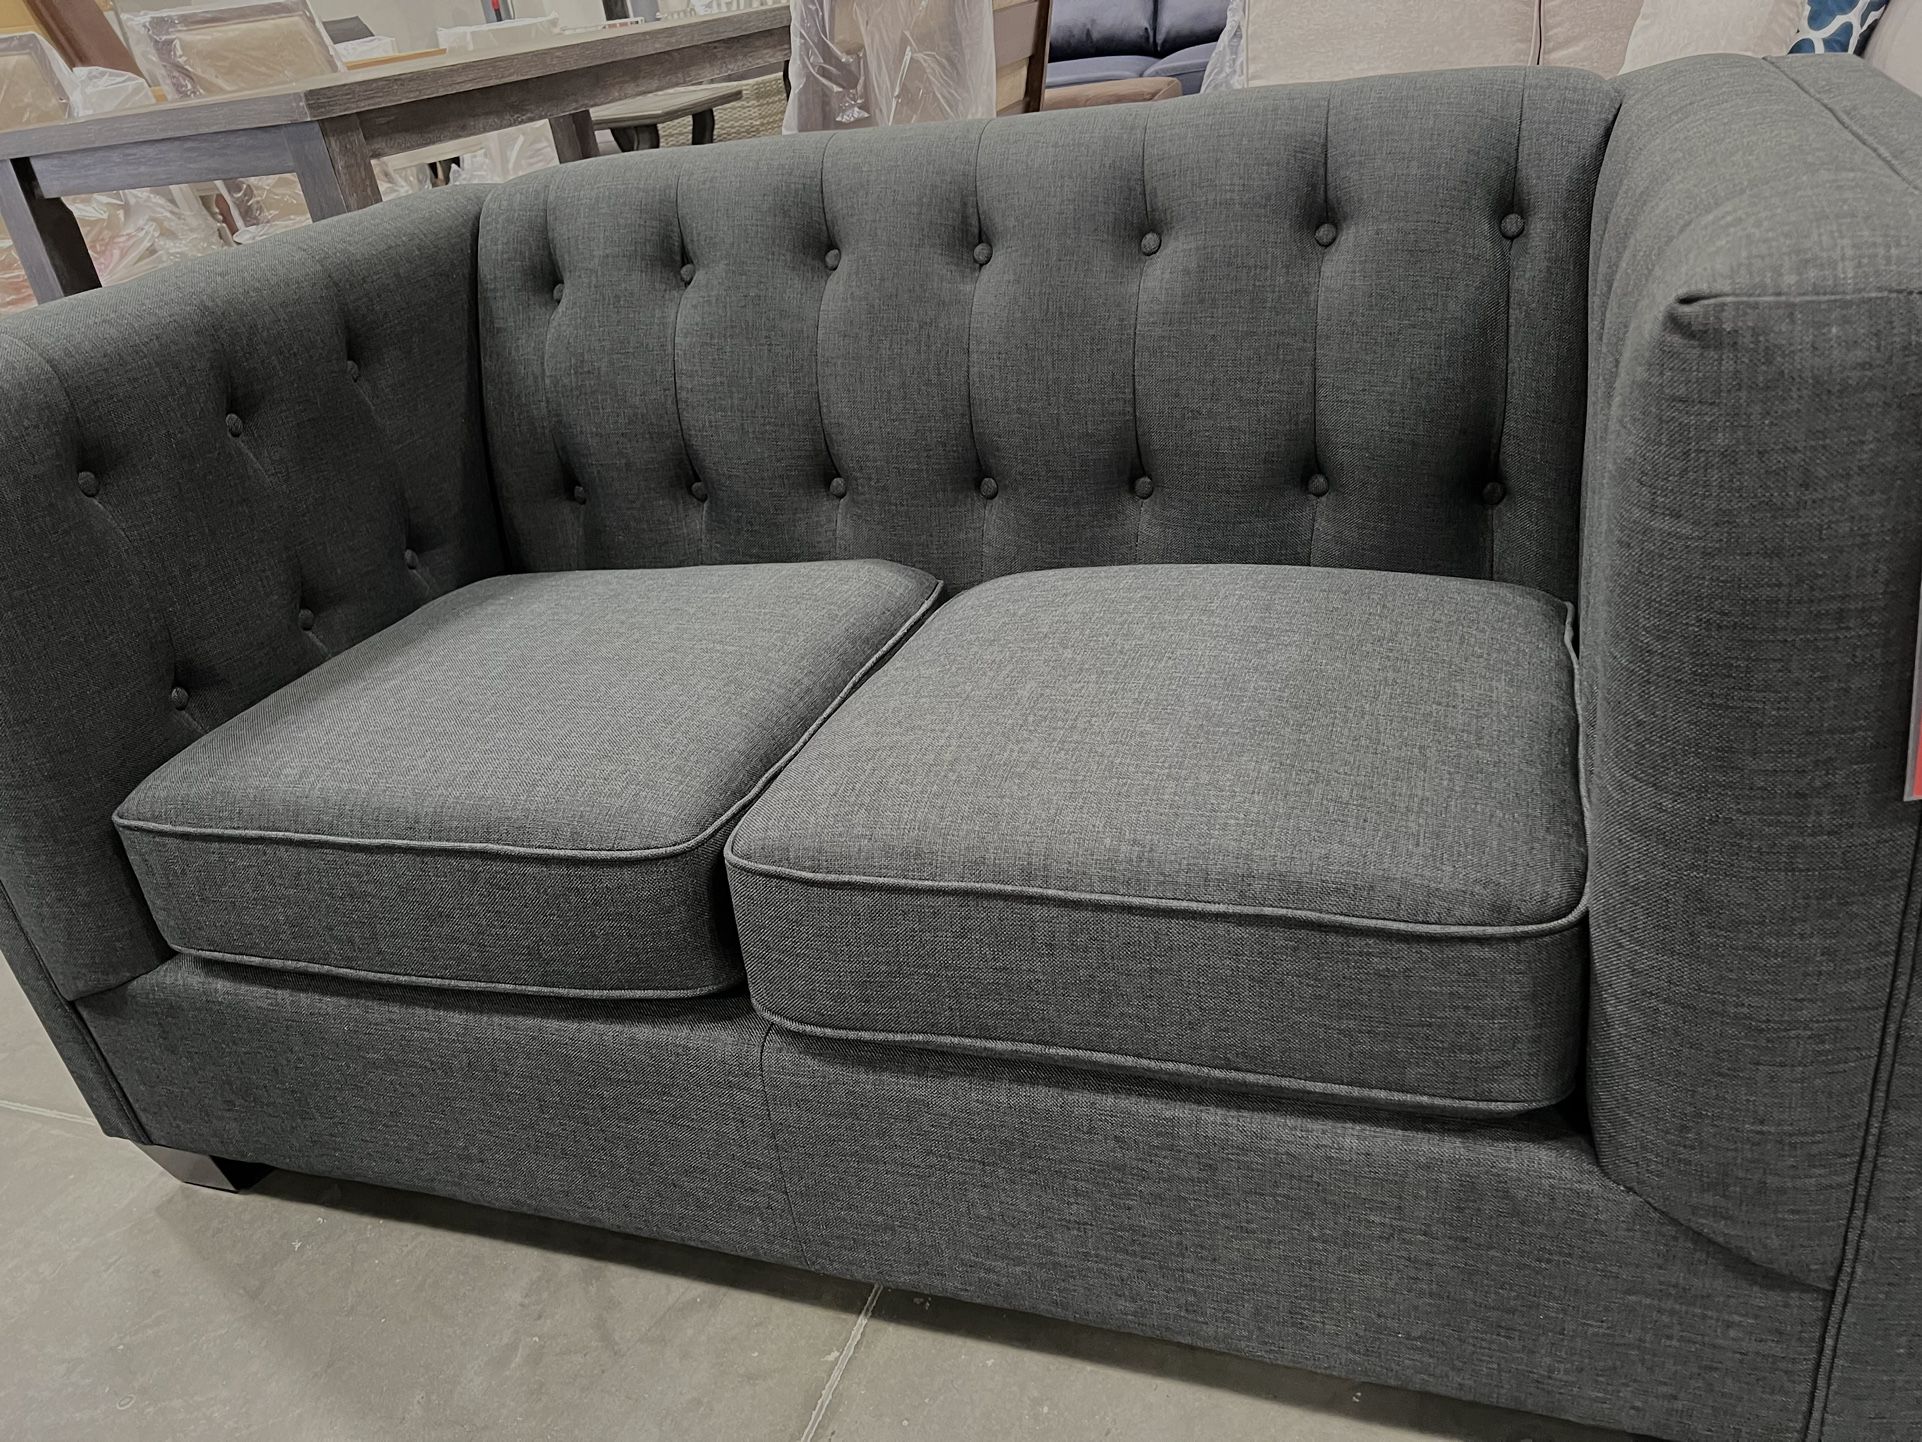 !!!New!! Beautiful Charcoal Loveseat, Grey Loveseat, Sofa, Couch, Tufted Design Loveseat, 